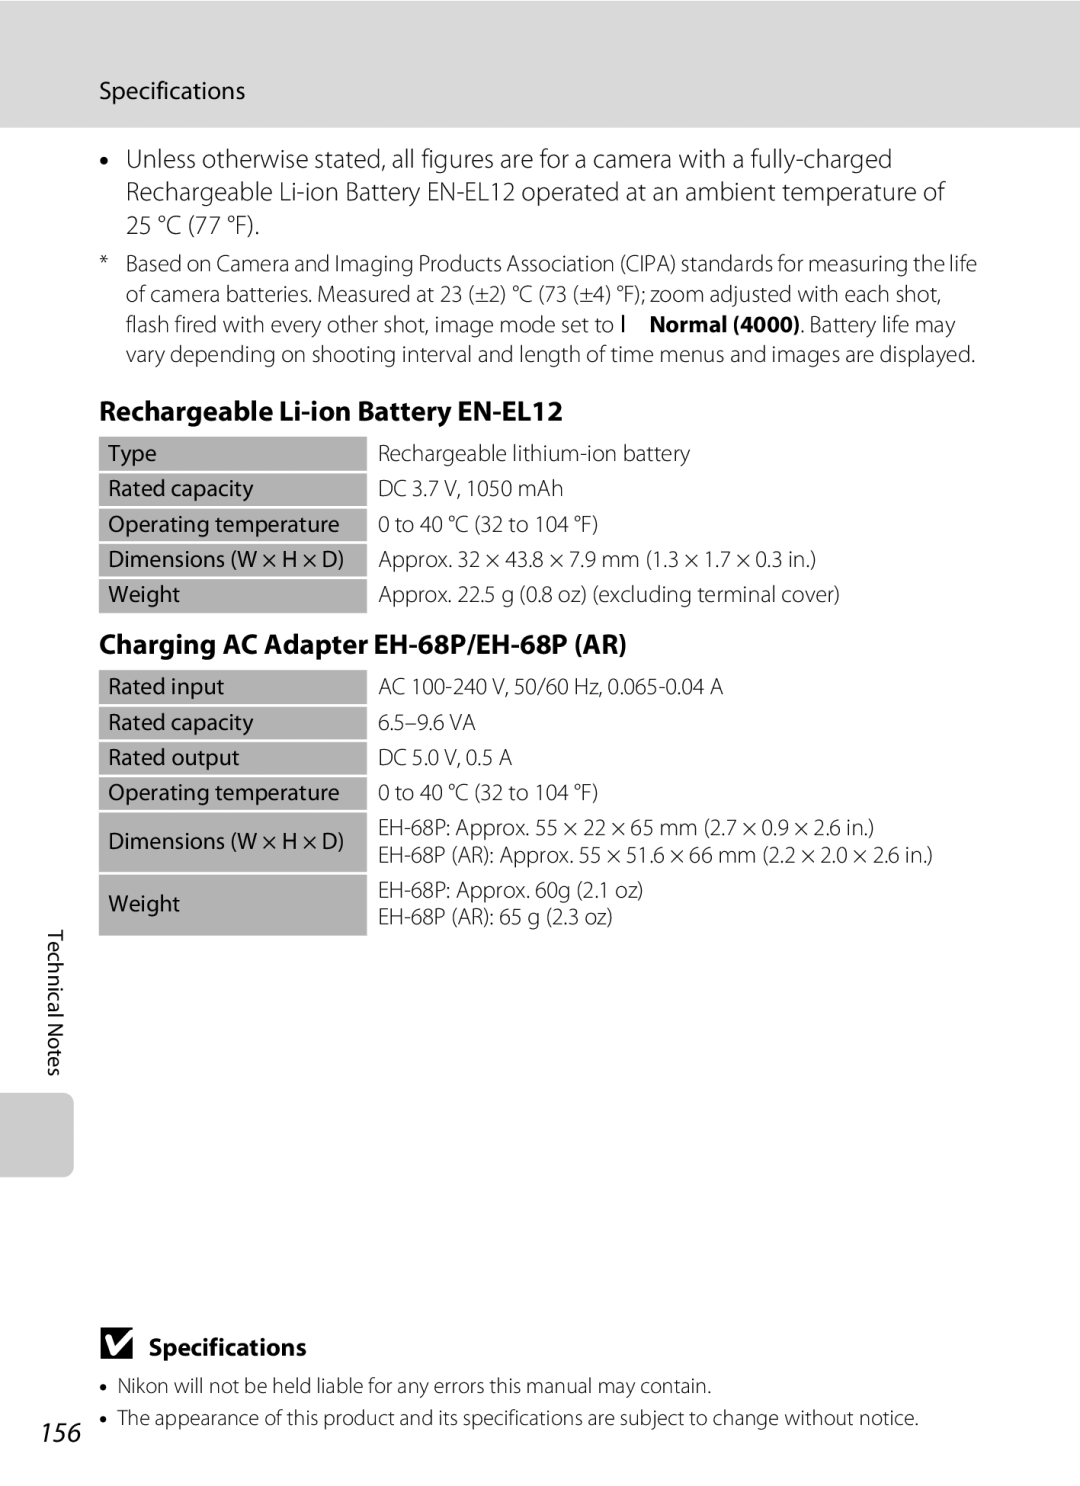 Nortel Networks S640 user manual Rechargeable Li-ion Battery EN-EL12, Charging AC Adapter EH-68P/EH-68P AR, Specifications 